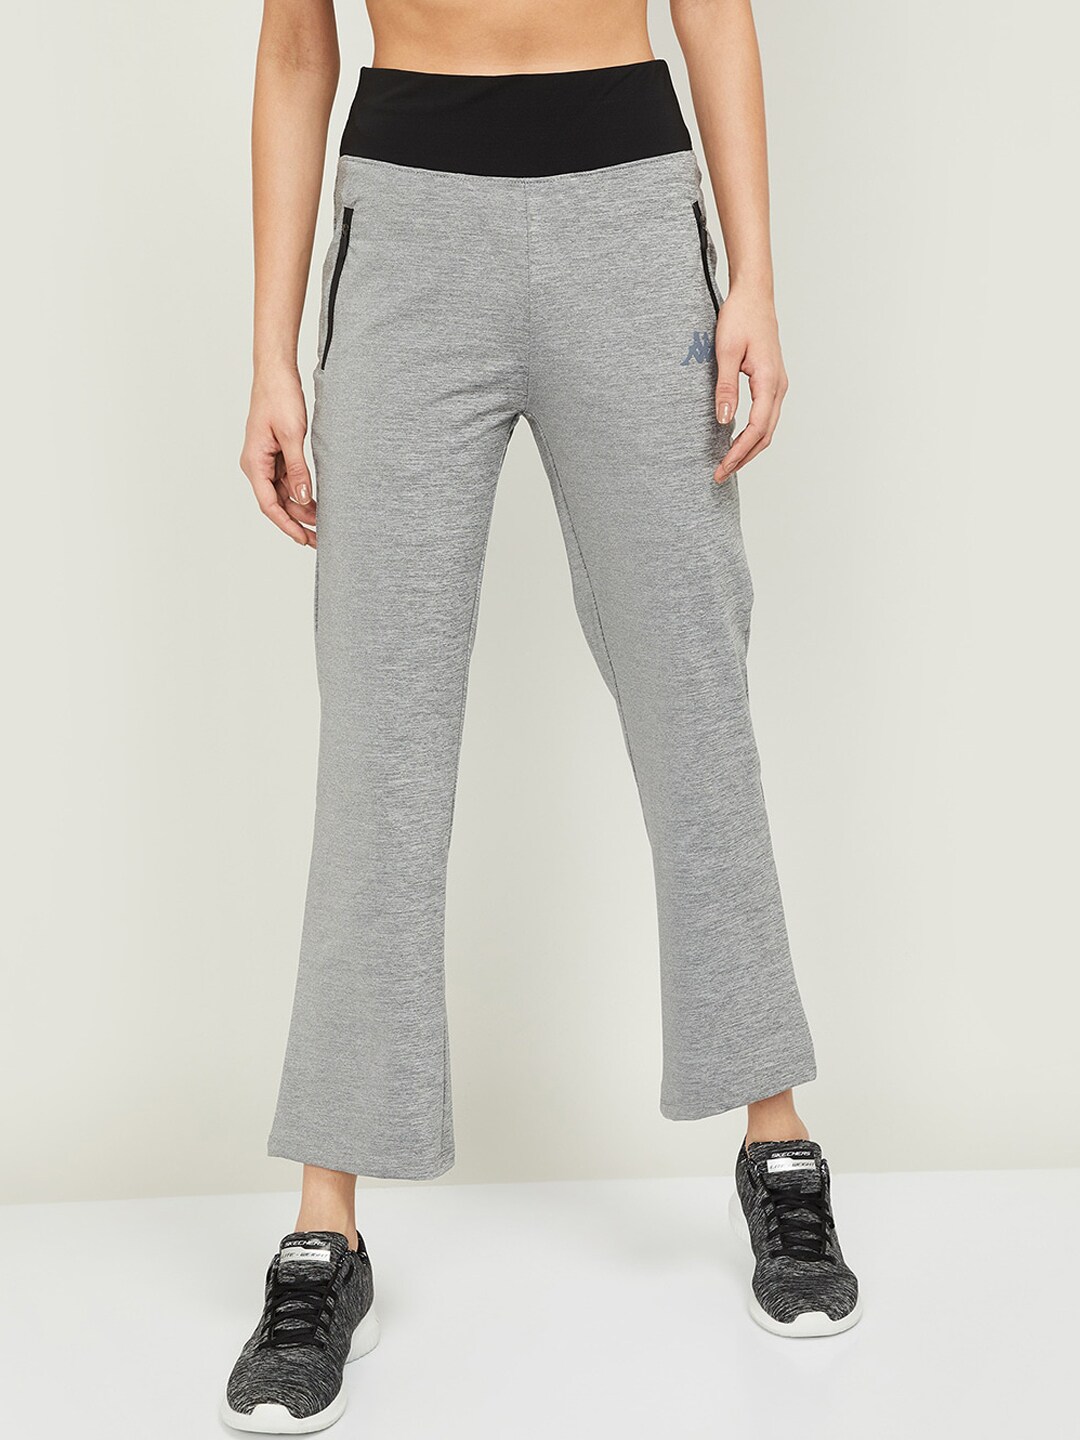 Kappa Women Grey Solid Relaxed Fit Track Pants Price in India